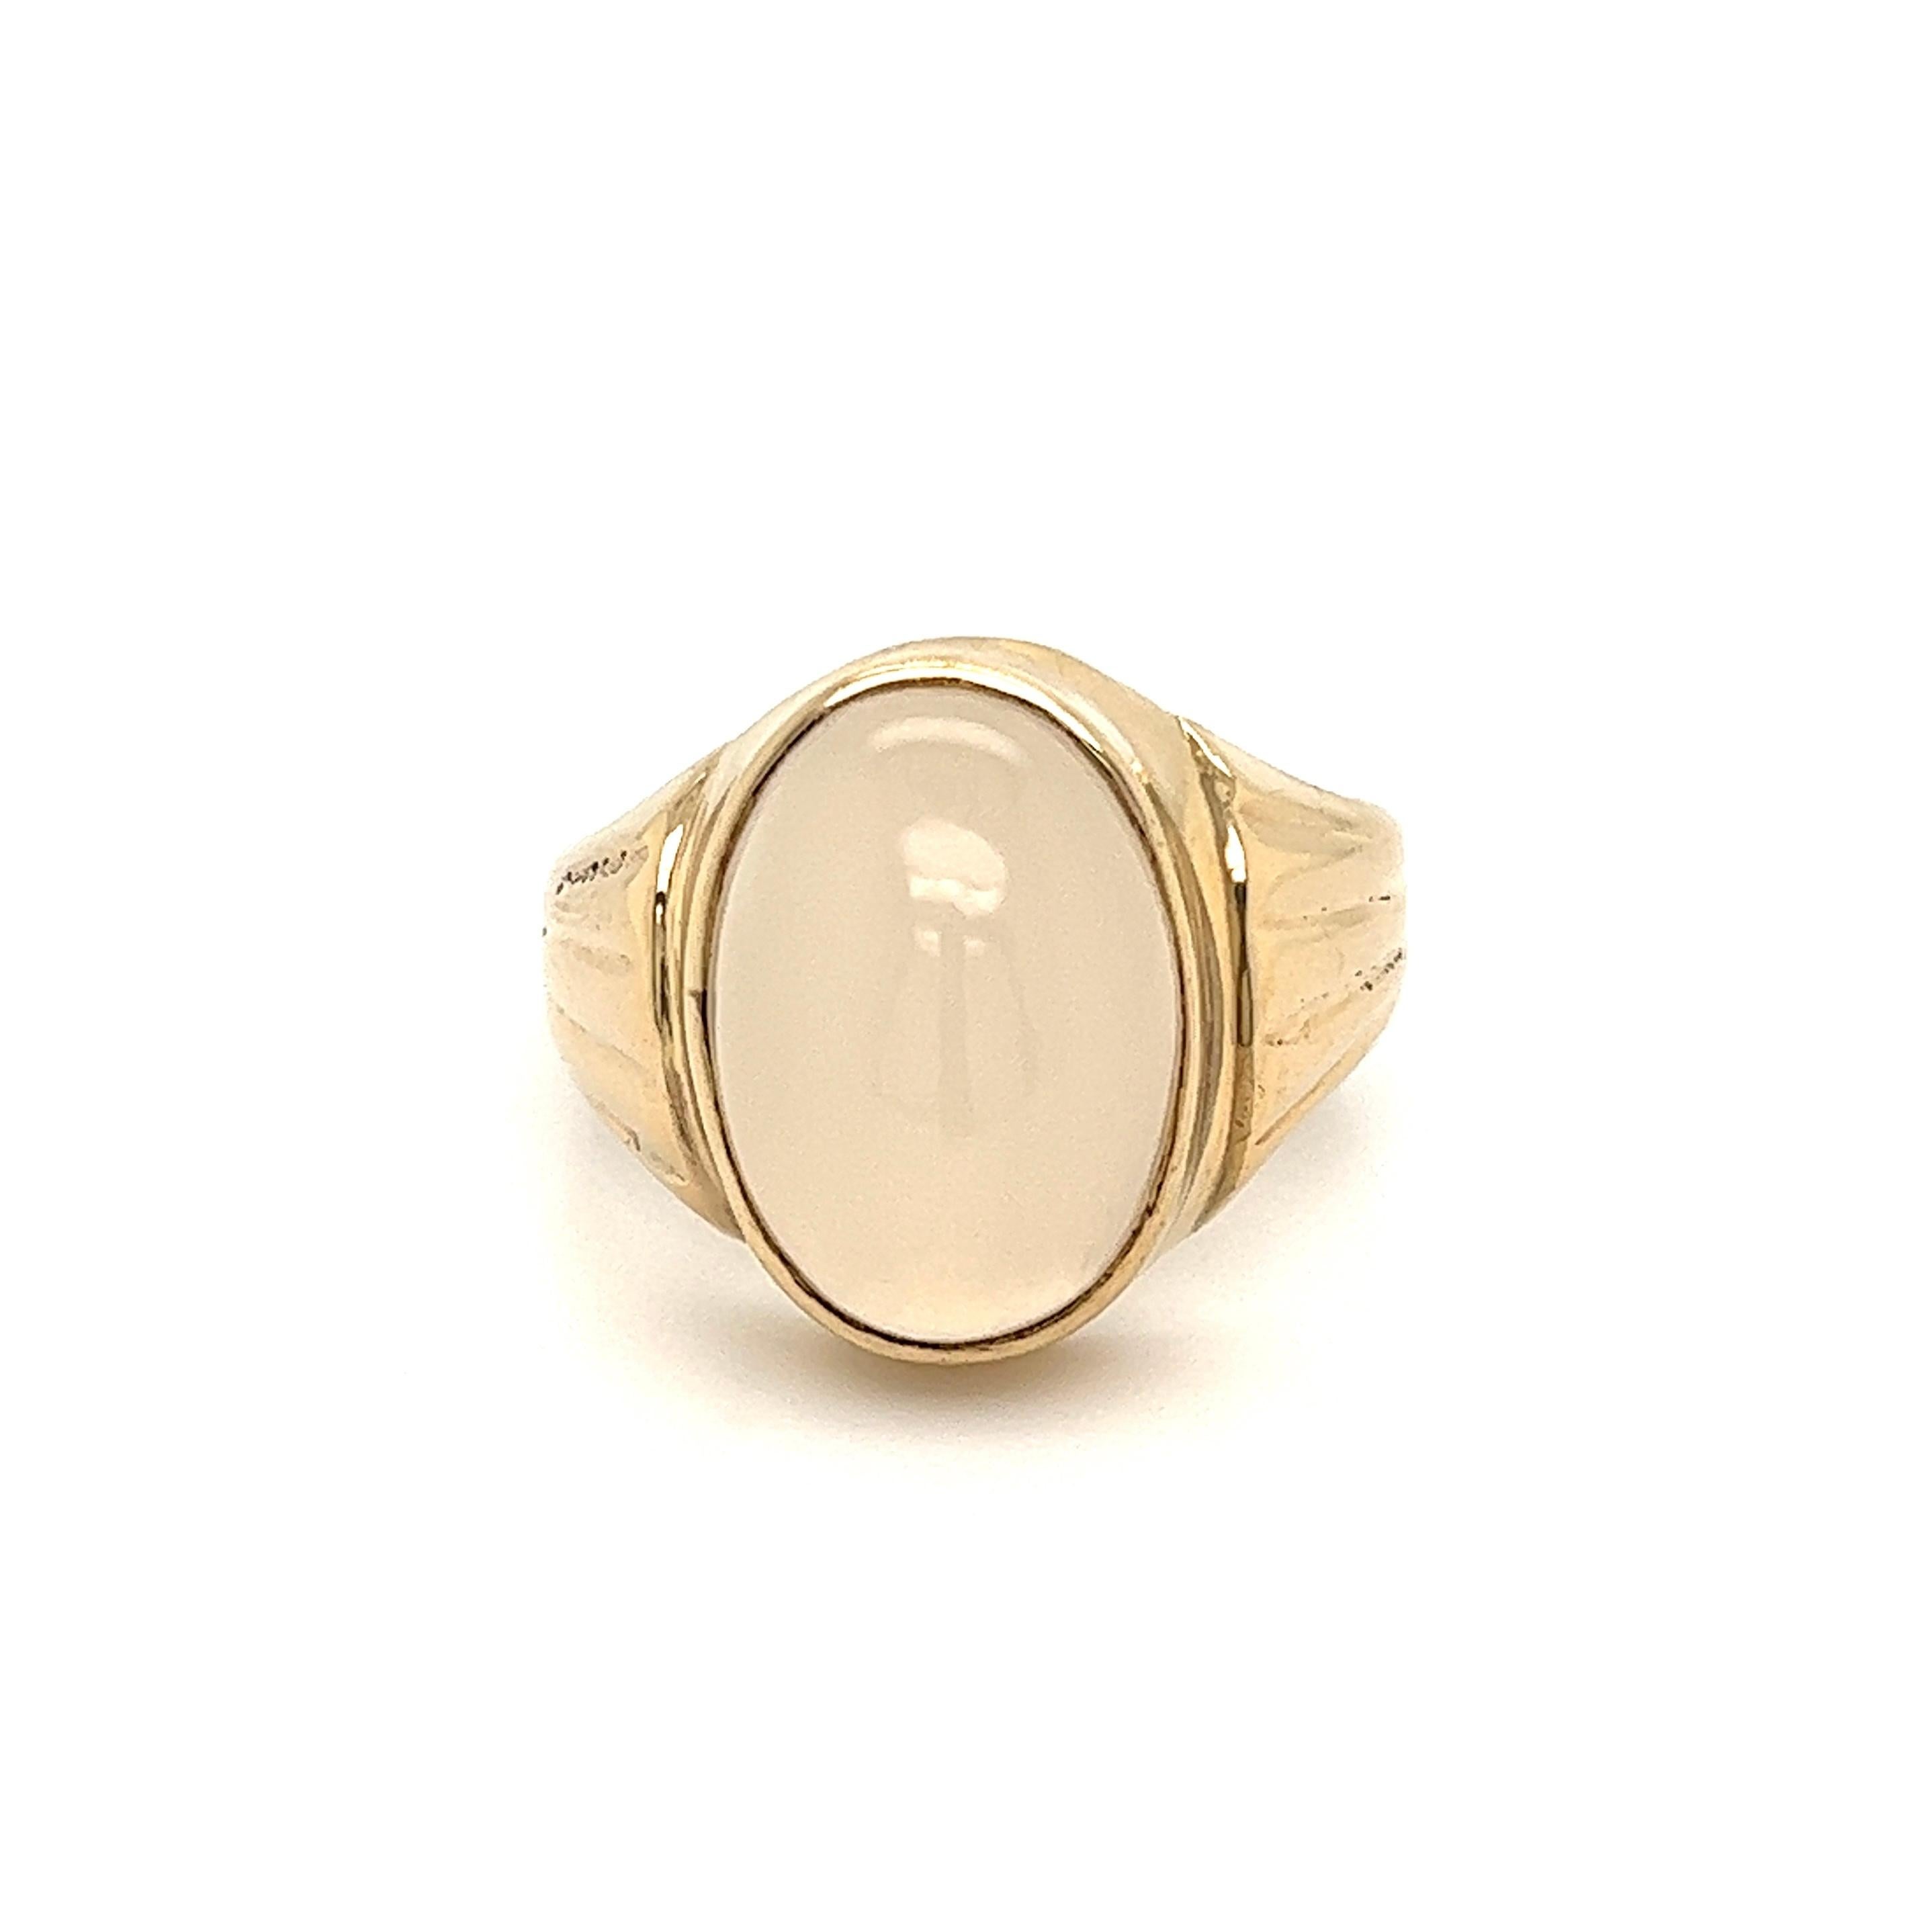 Handsome Fine Quality Gent’s Moonstone Gold Signet Ring. Securely set with an Oval 6.50 Carat Moonstone, hand crafted in 14Karat Yellow Gold mounting. Ring size 10, ring sizing available. Dimensions 1.19”w x 0.85”h x 0.66”d. In excellent condition,